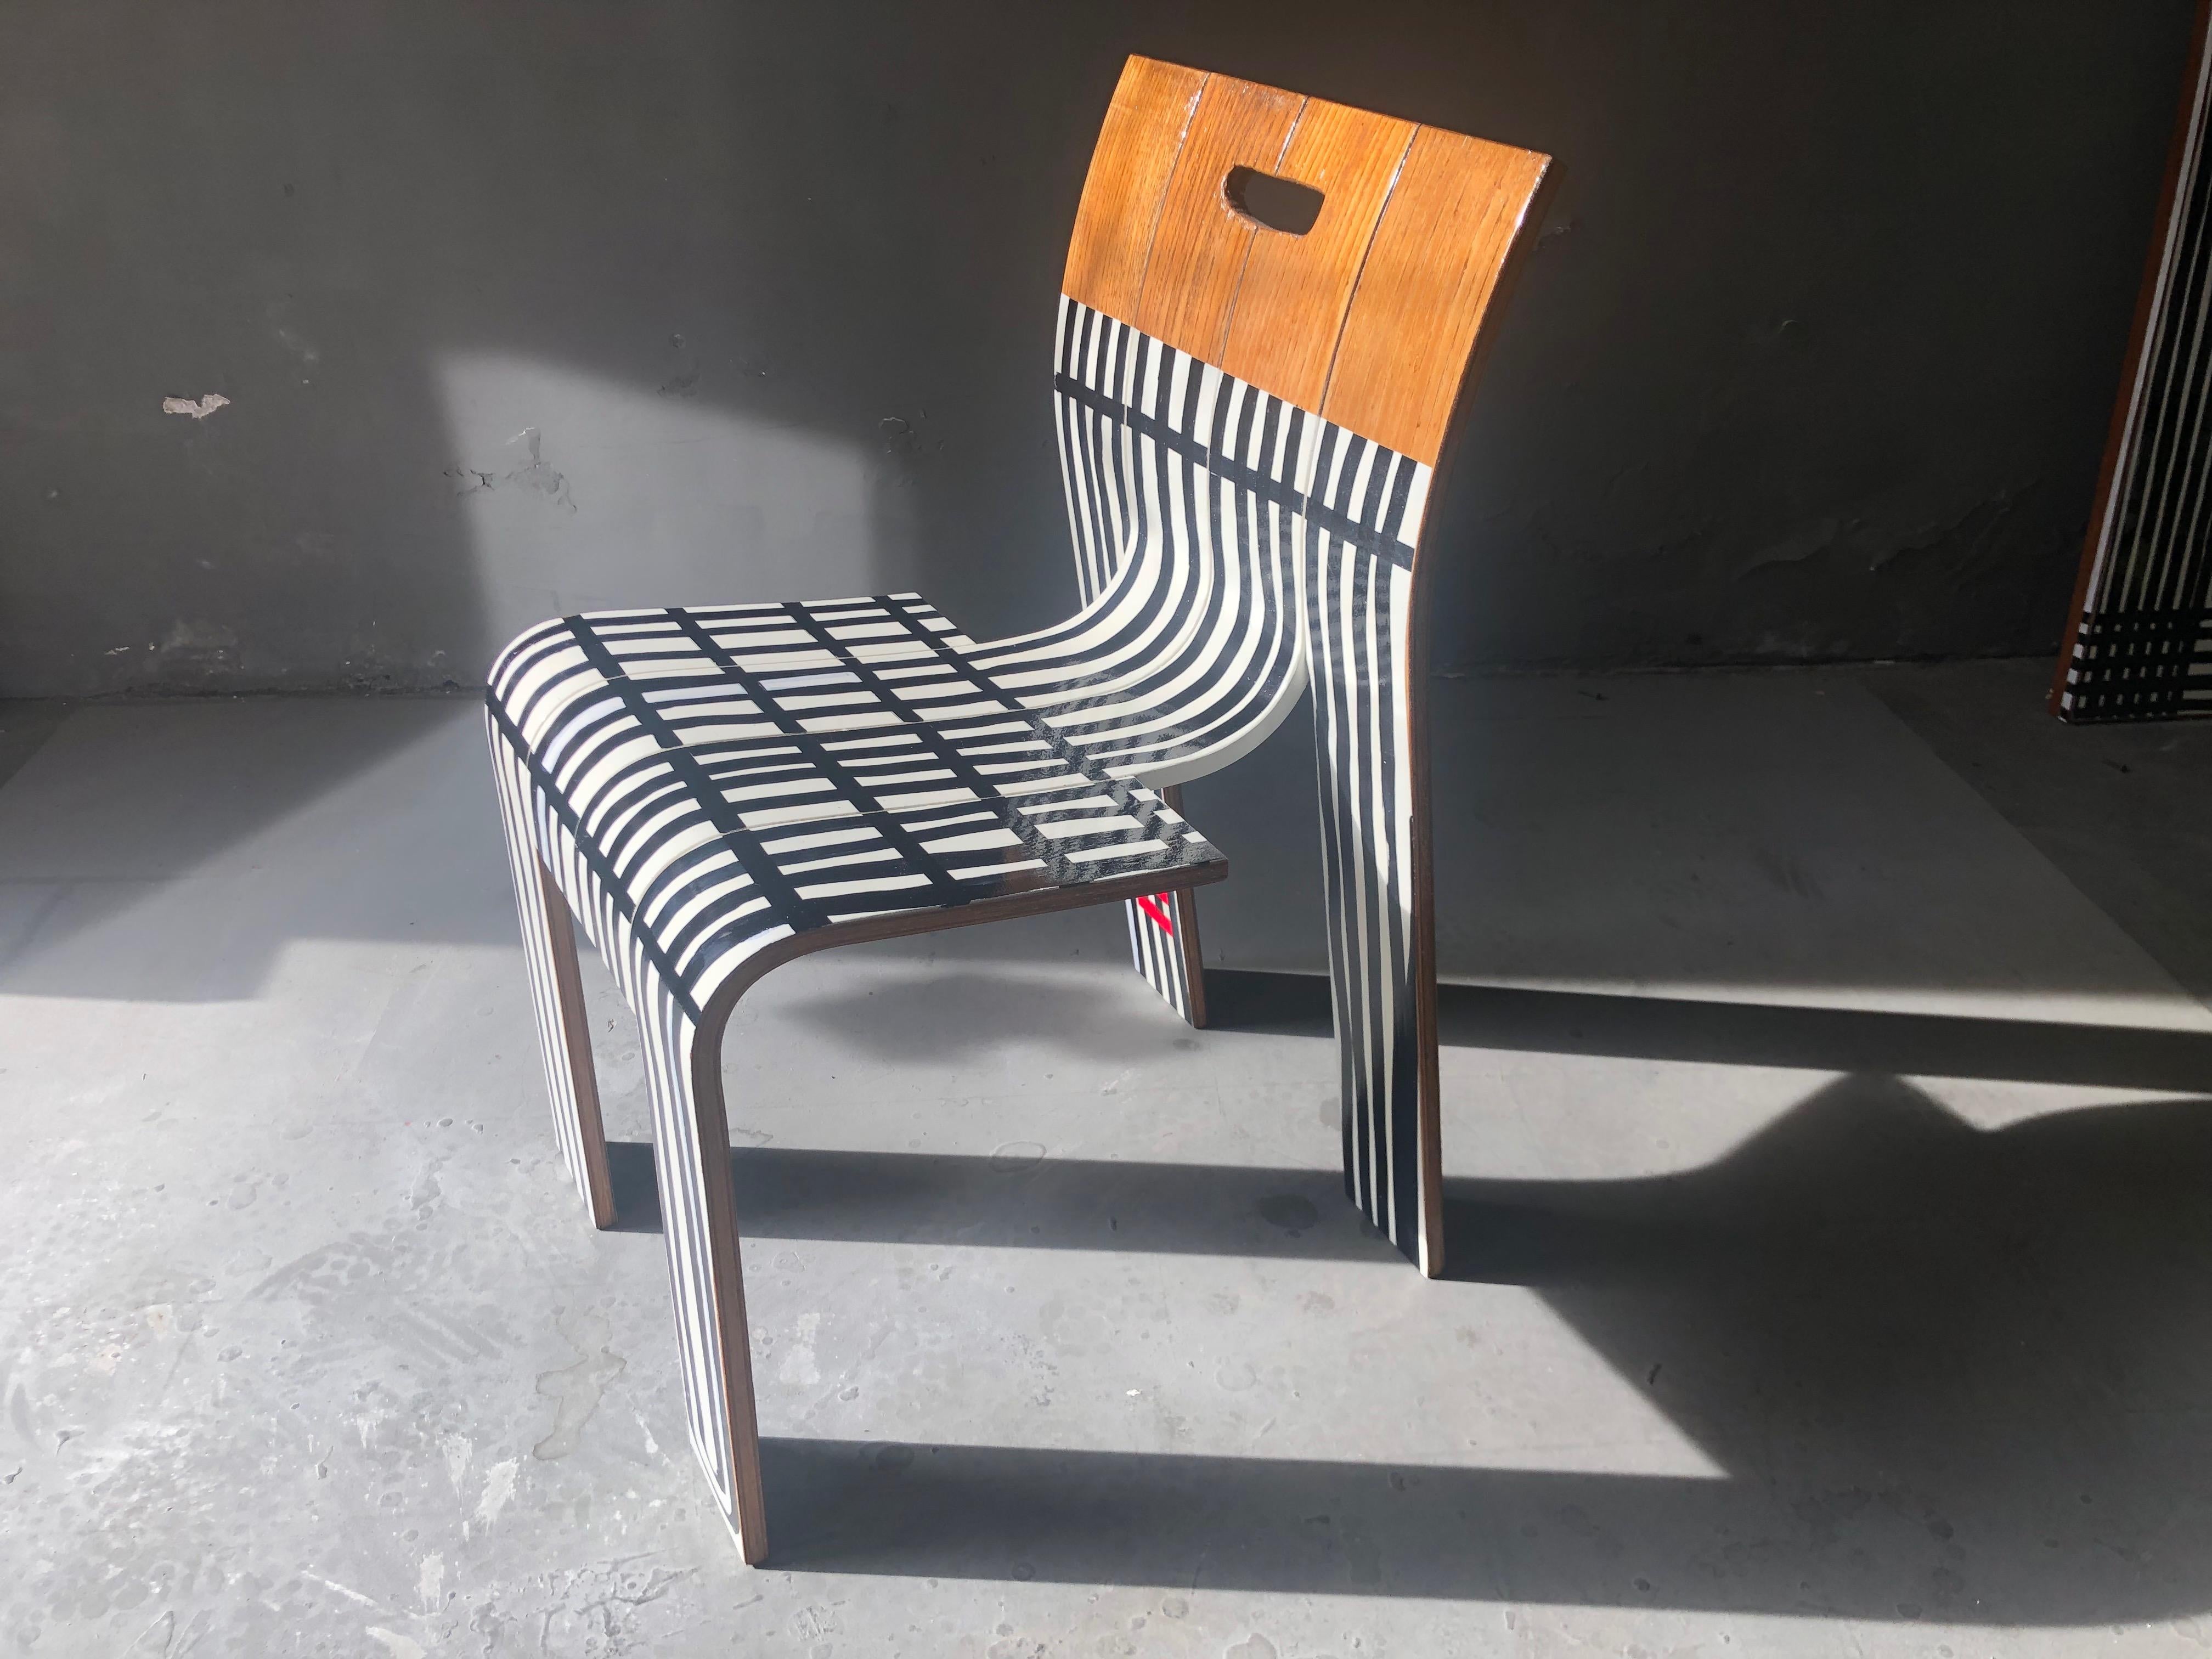 Two Strip Chairs Contemporised by Markus Friedrich Staab For Sale 6